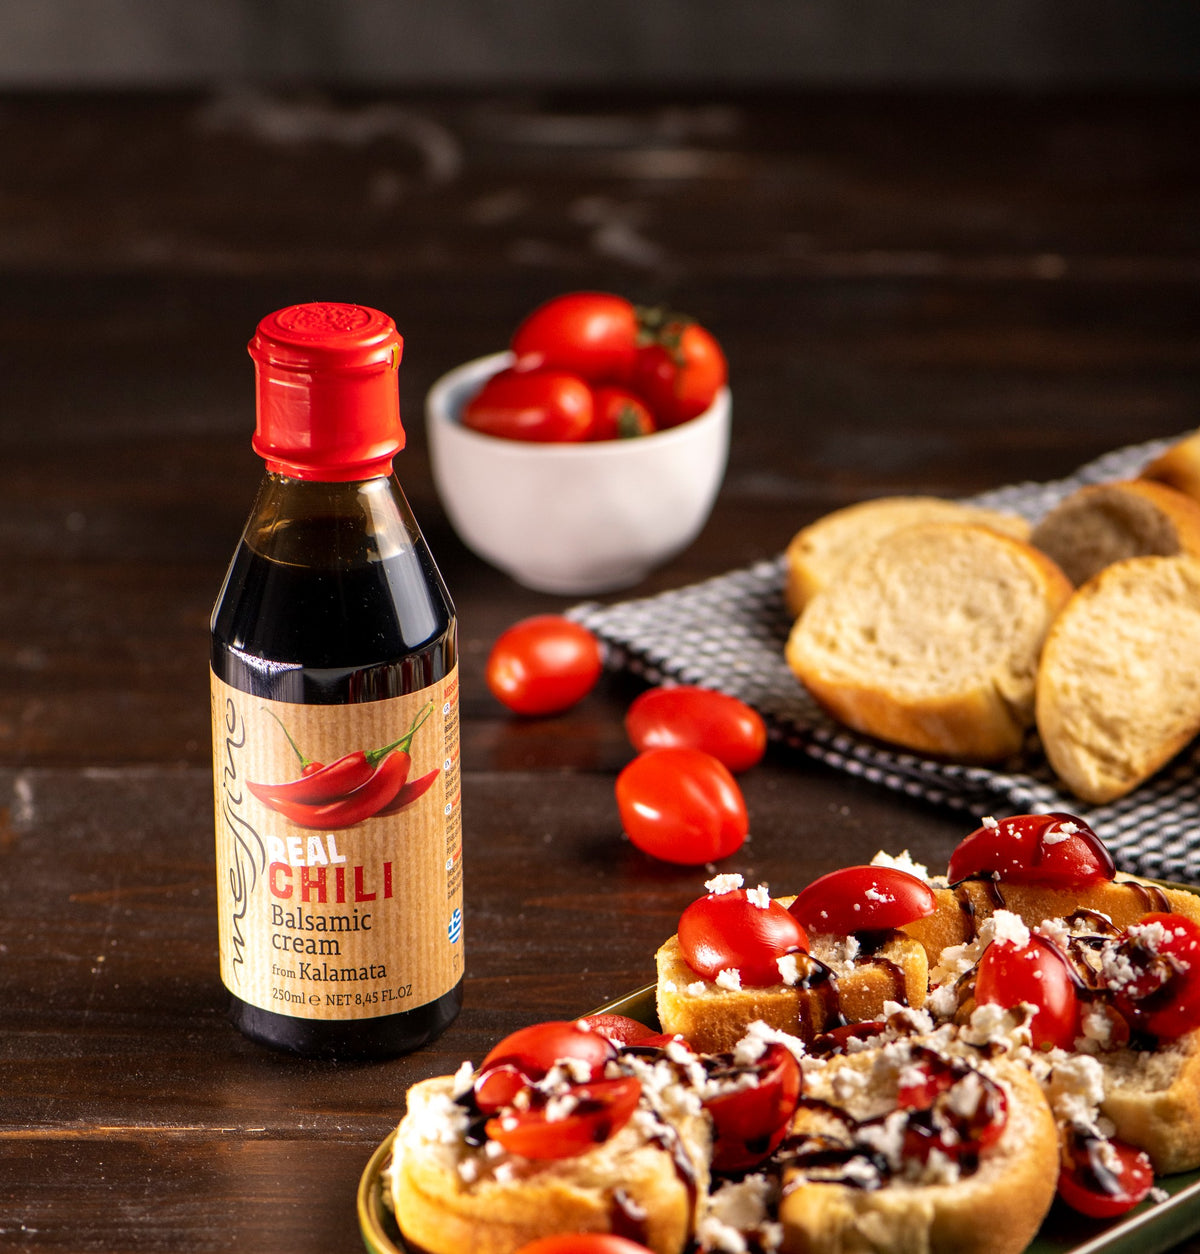 Bottle of Messino Balsamic Glaze with Chili and bruschetta in the foreground